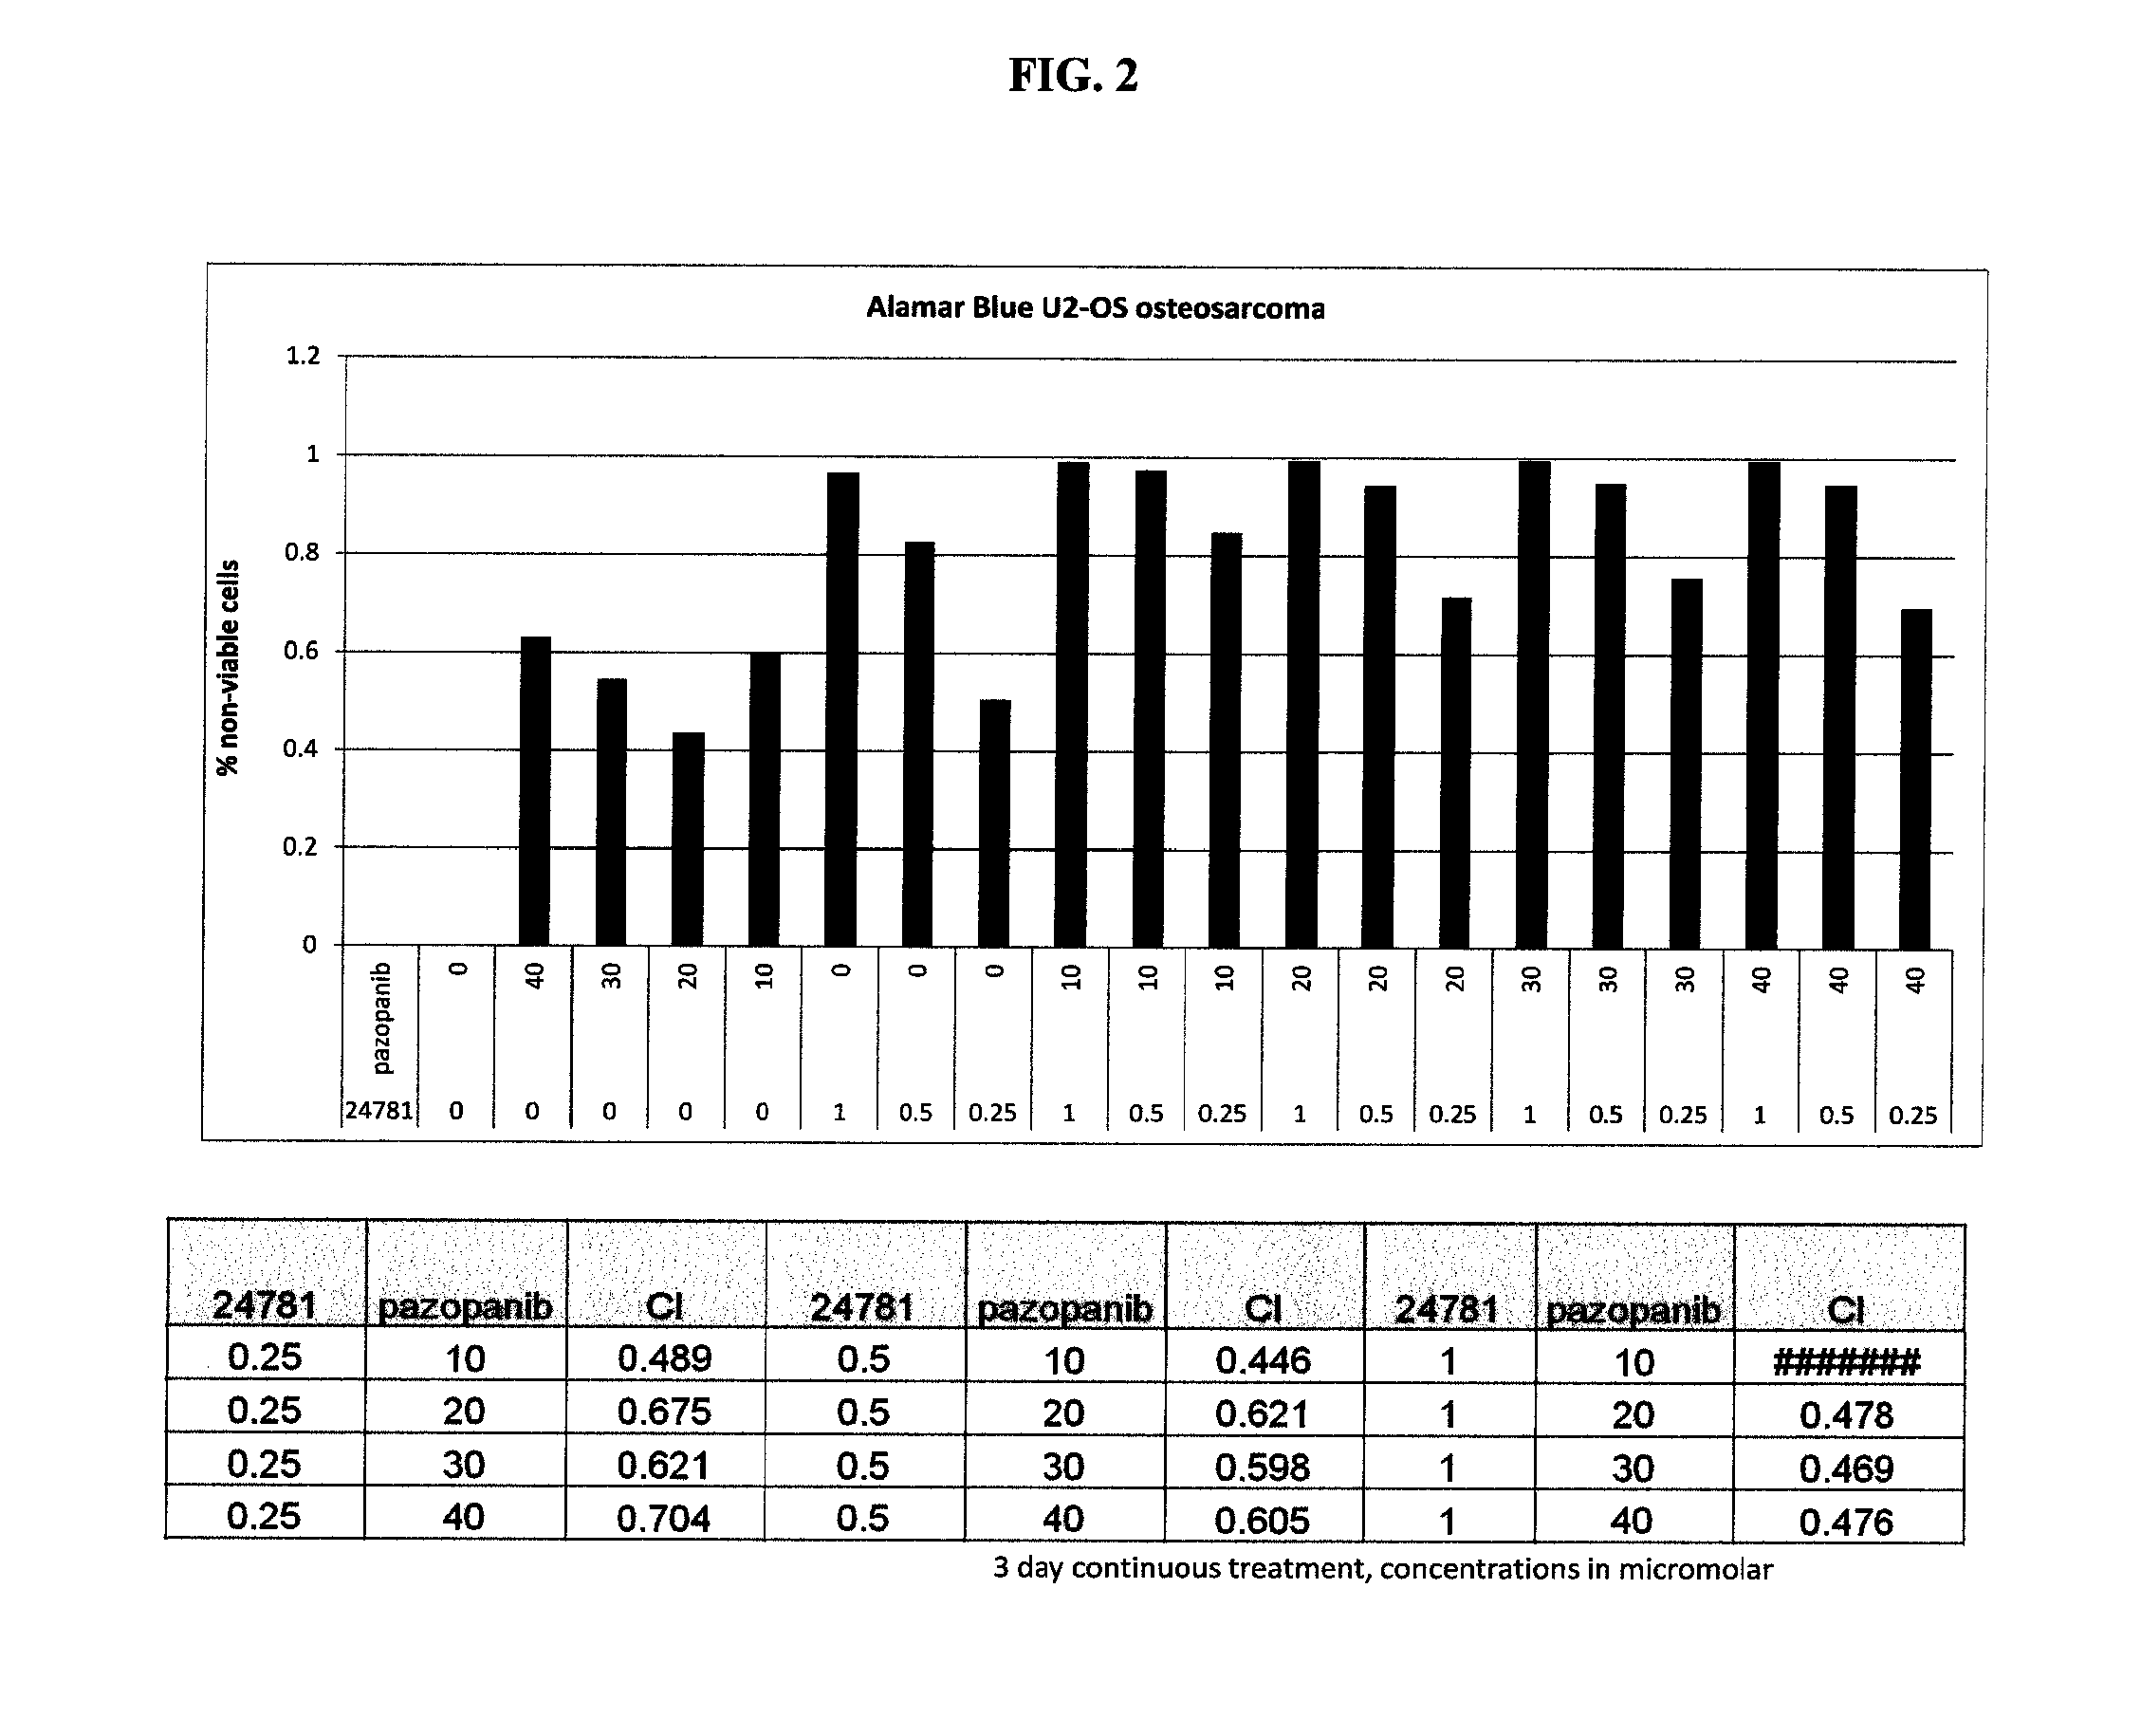 Combinations of histone deacetylase inhibitor and pazopanib and uses thereof